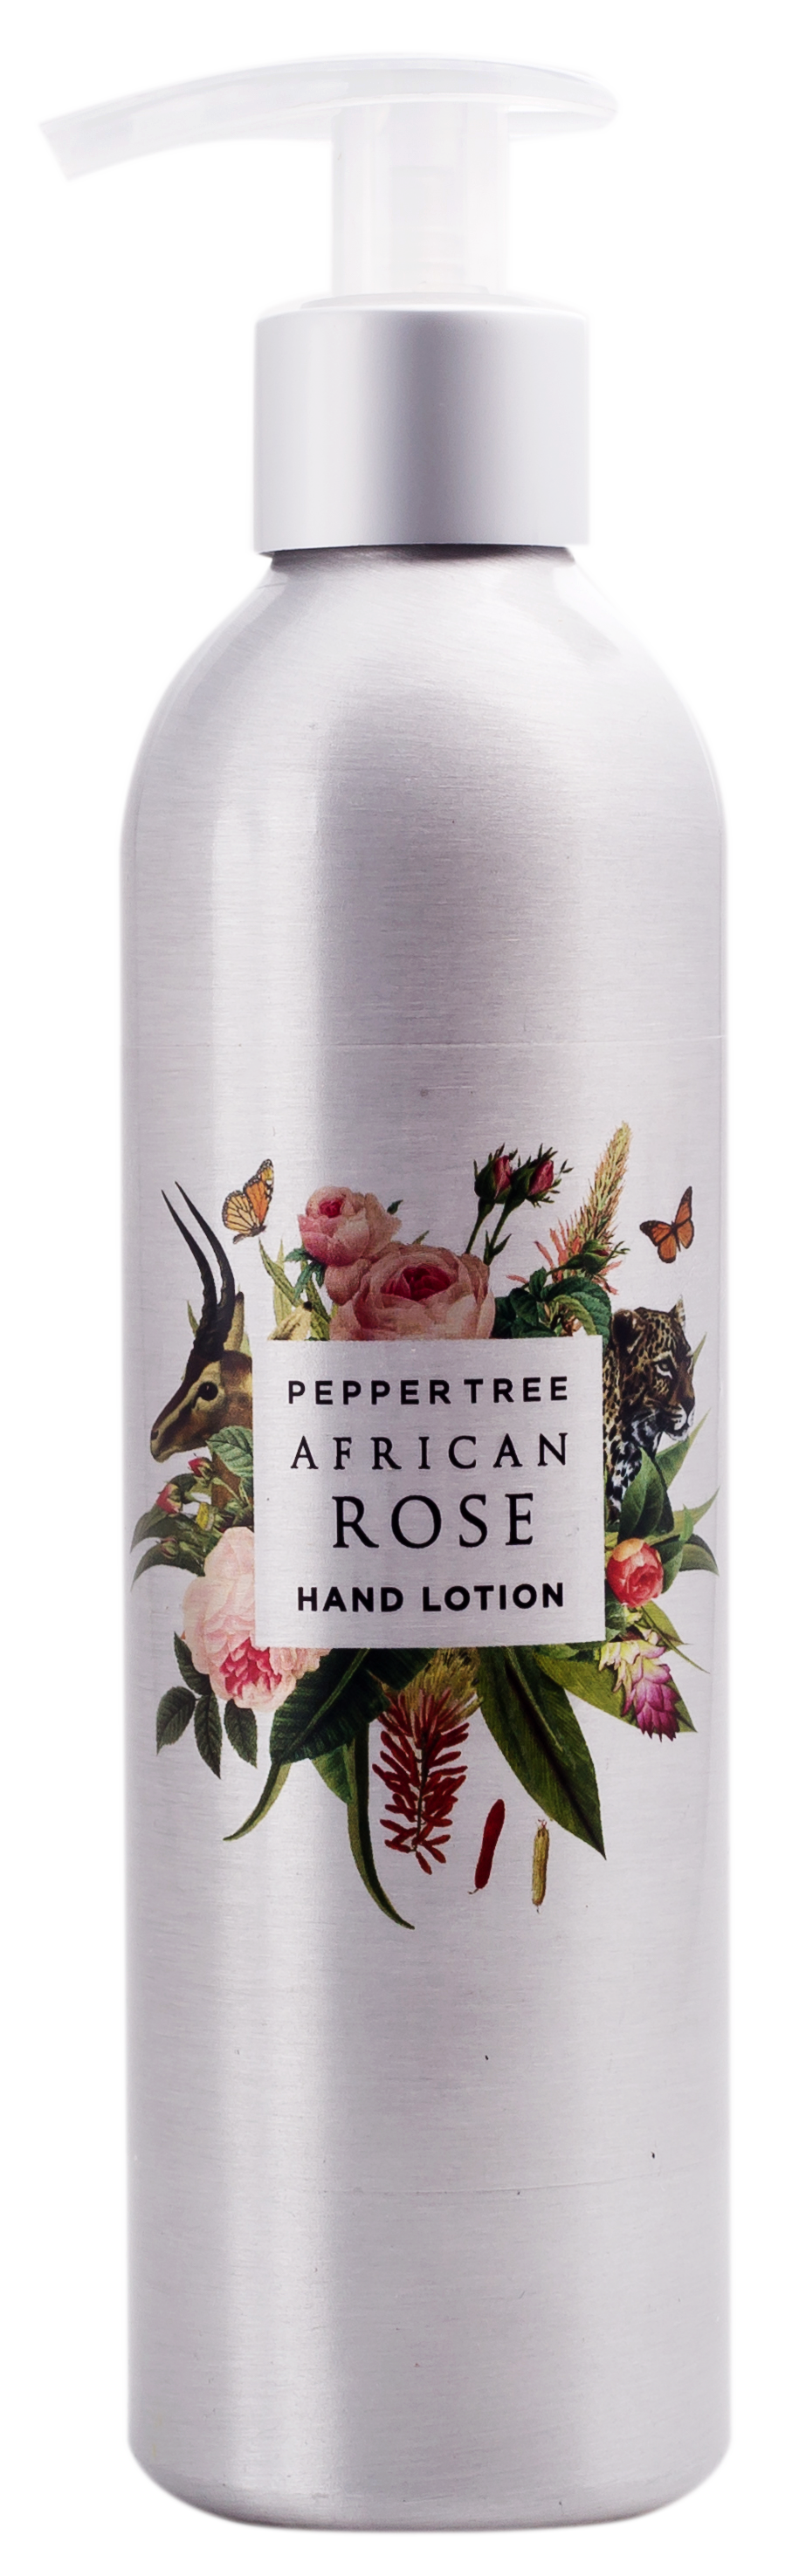 African Rose Hand Lotion 250 ml